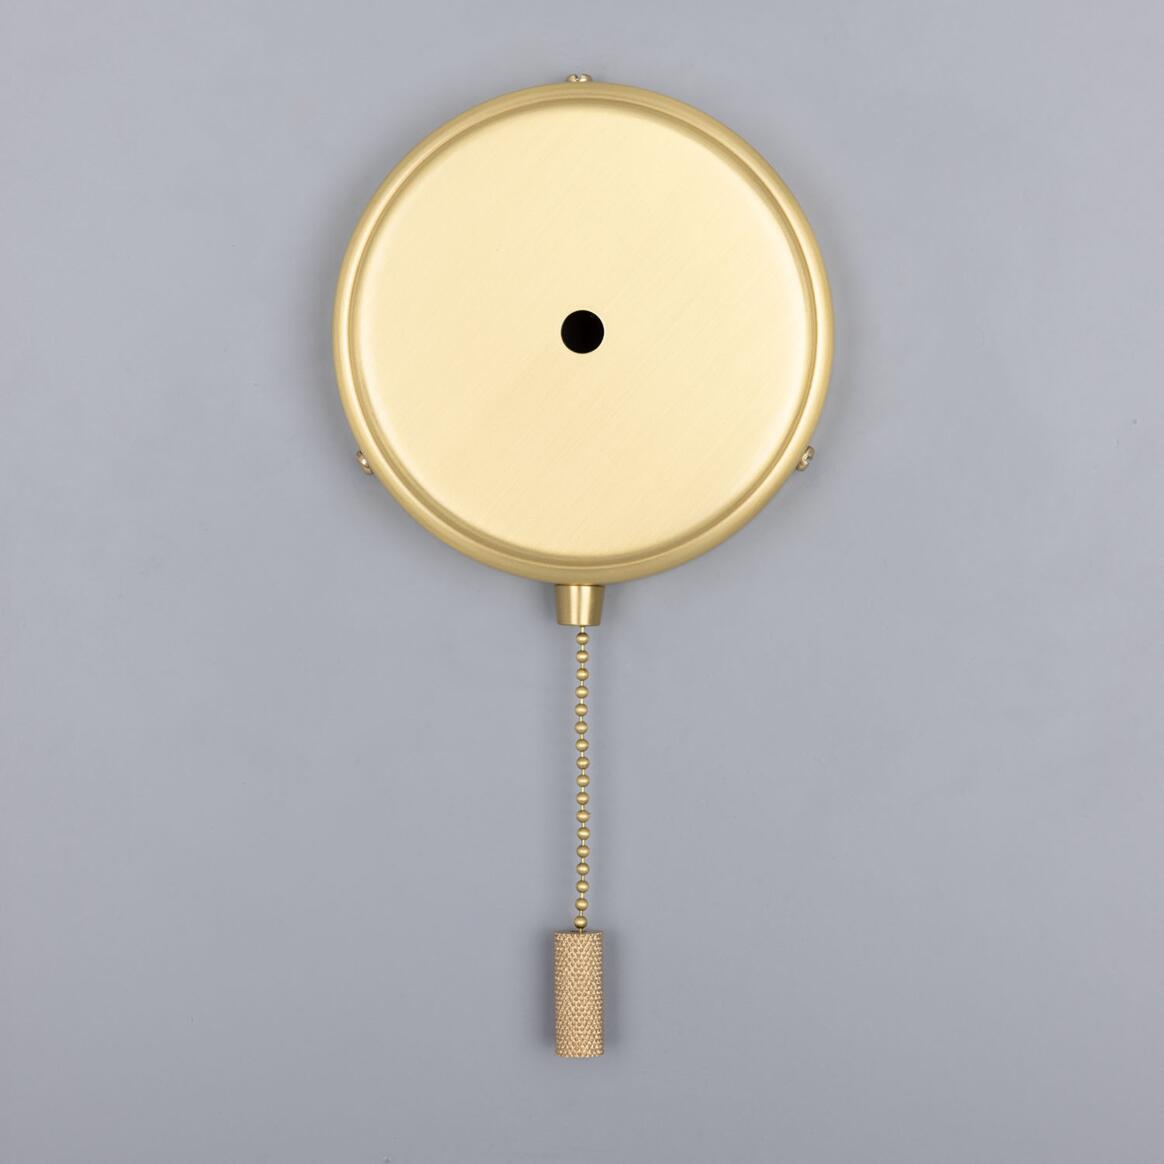 Pressed Brass Wall Bracket with Pull Switch 12cm main product image